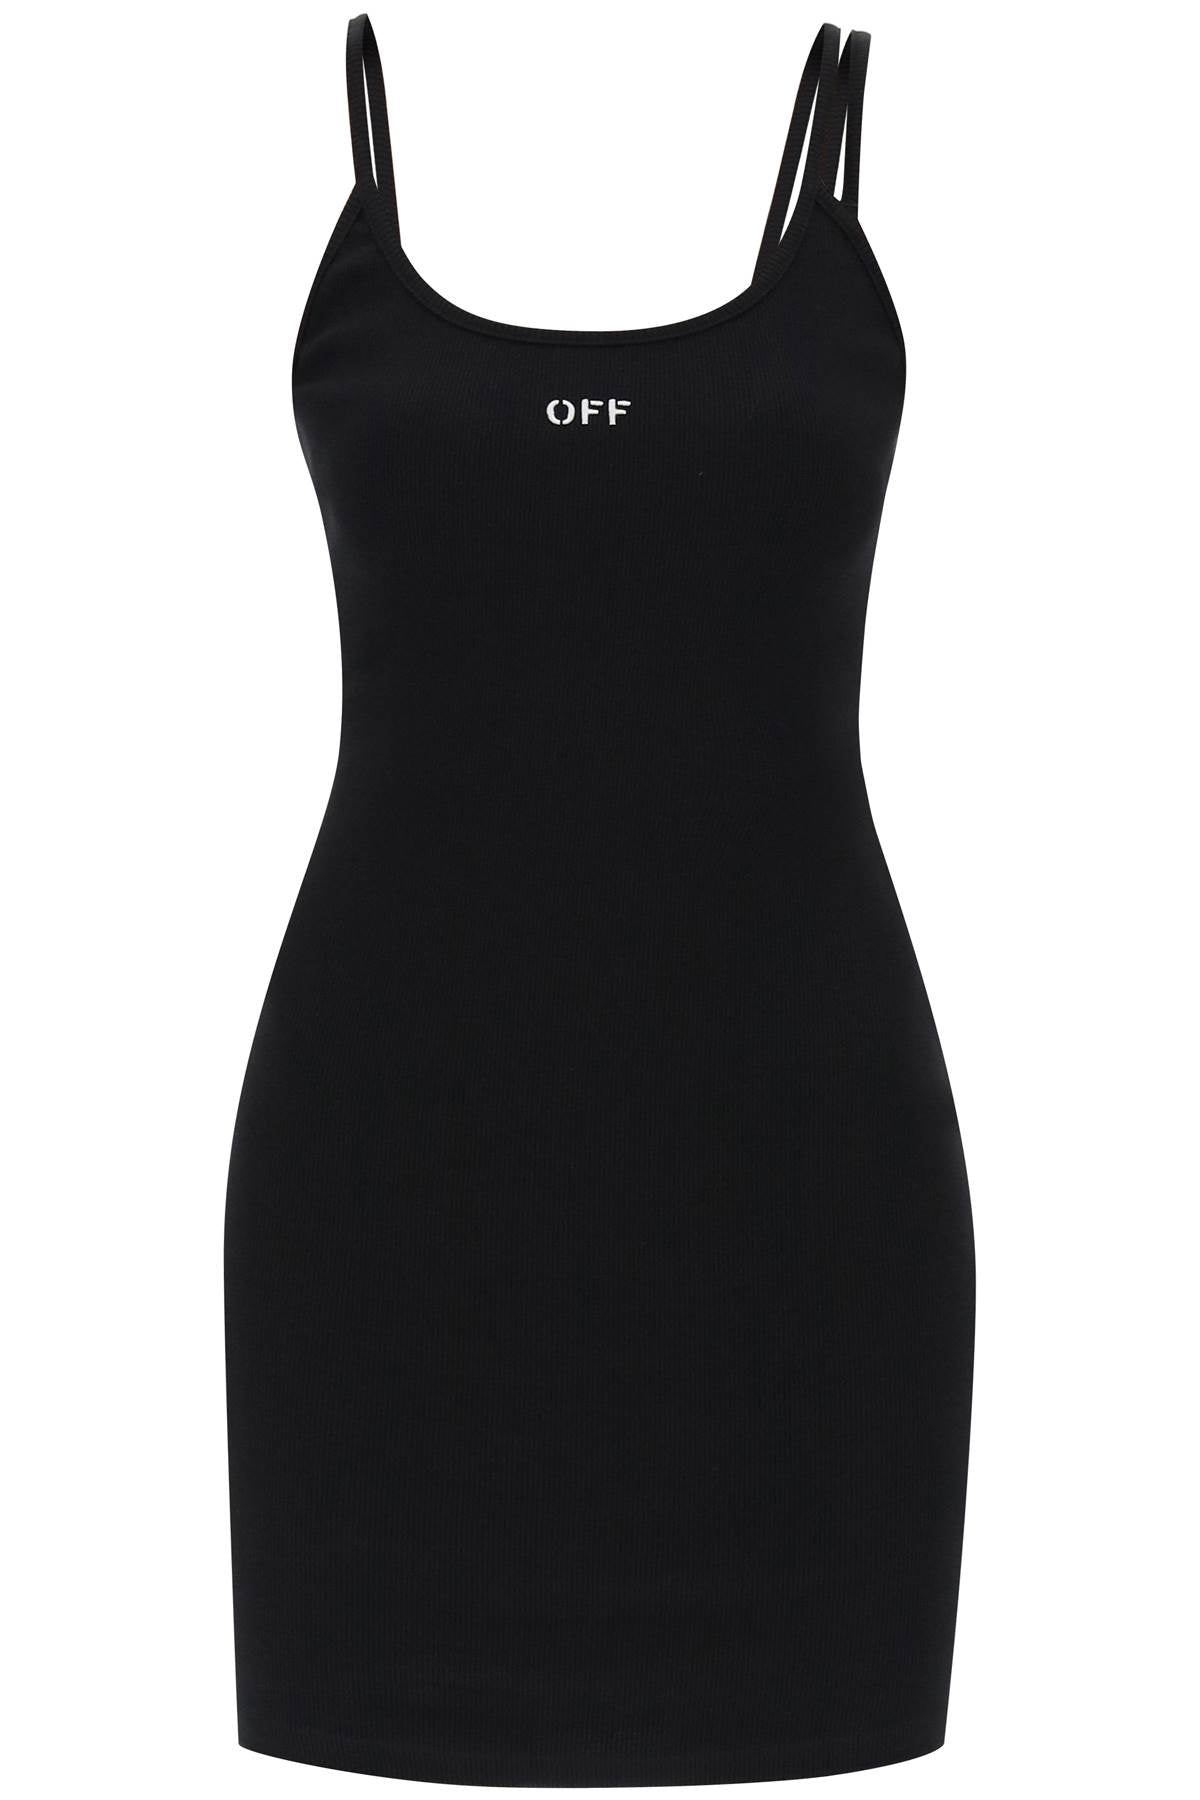 Off-White Tank Dress With Off Embroidery Women - 1